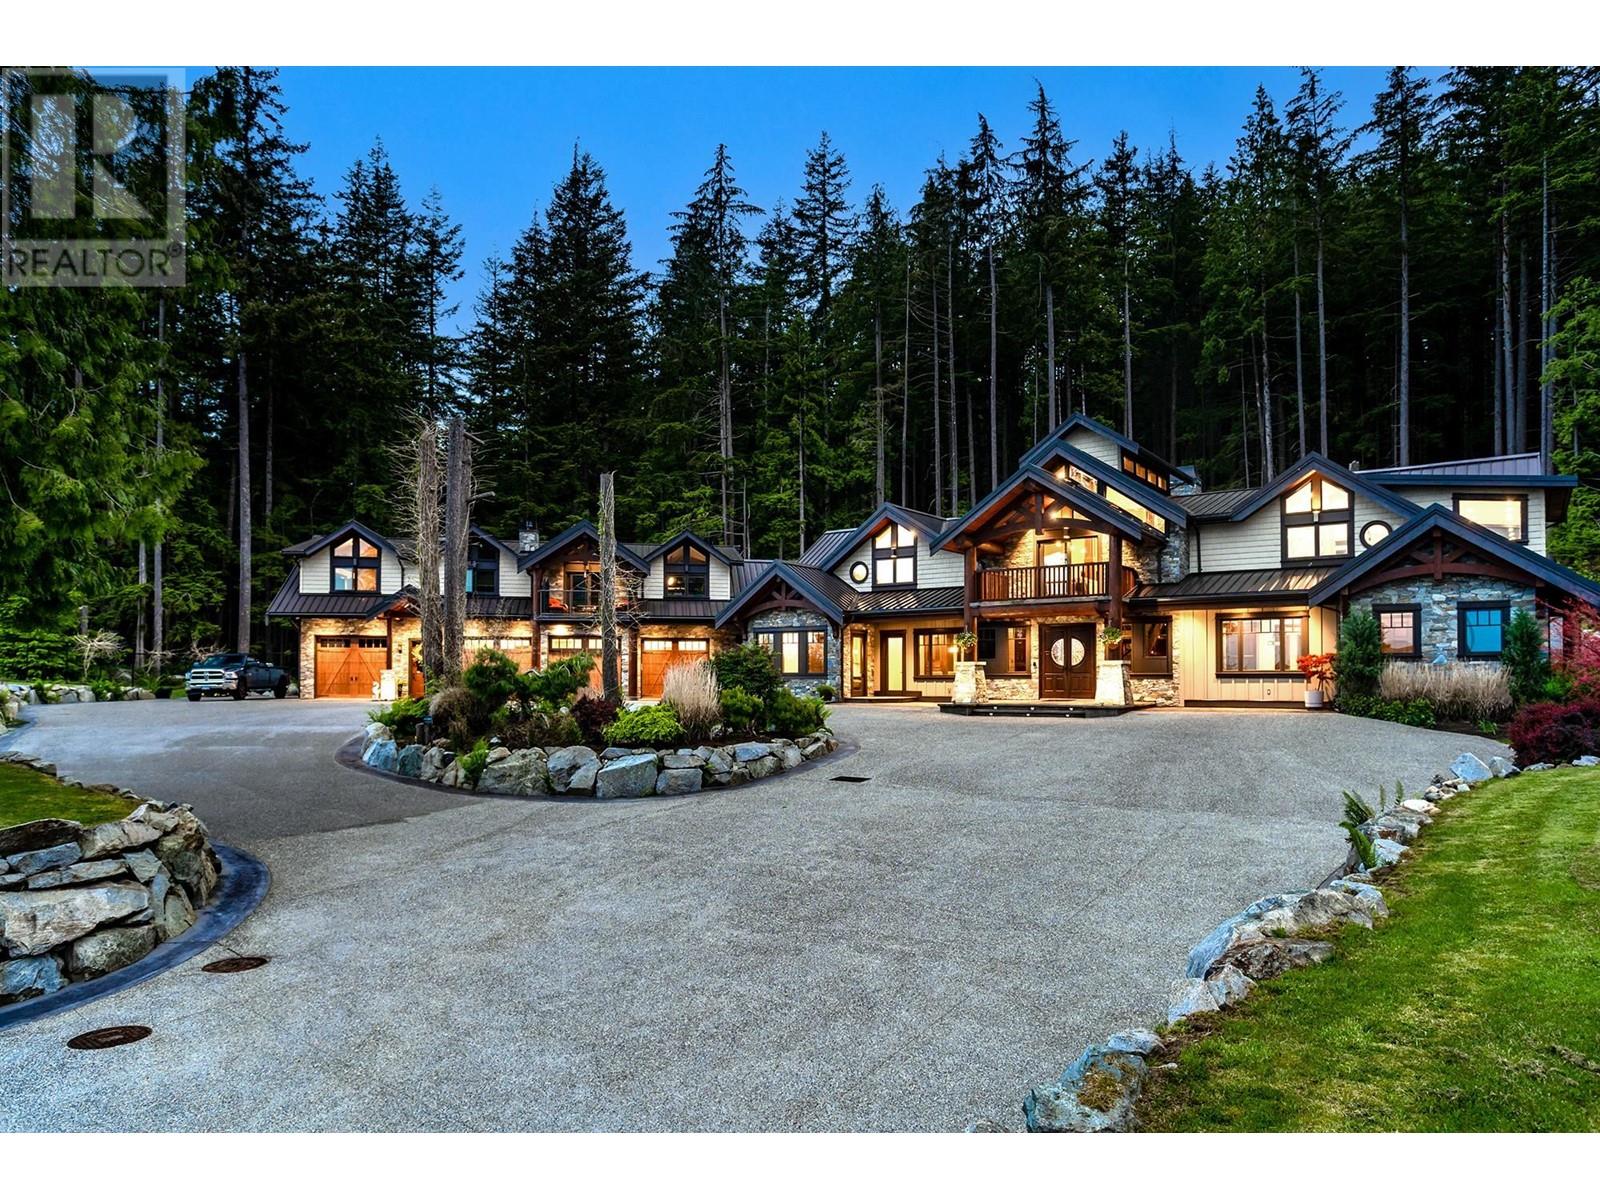 3299 BLACK BEAR WAY located in Anmore, British Columbia